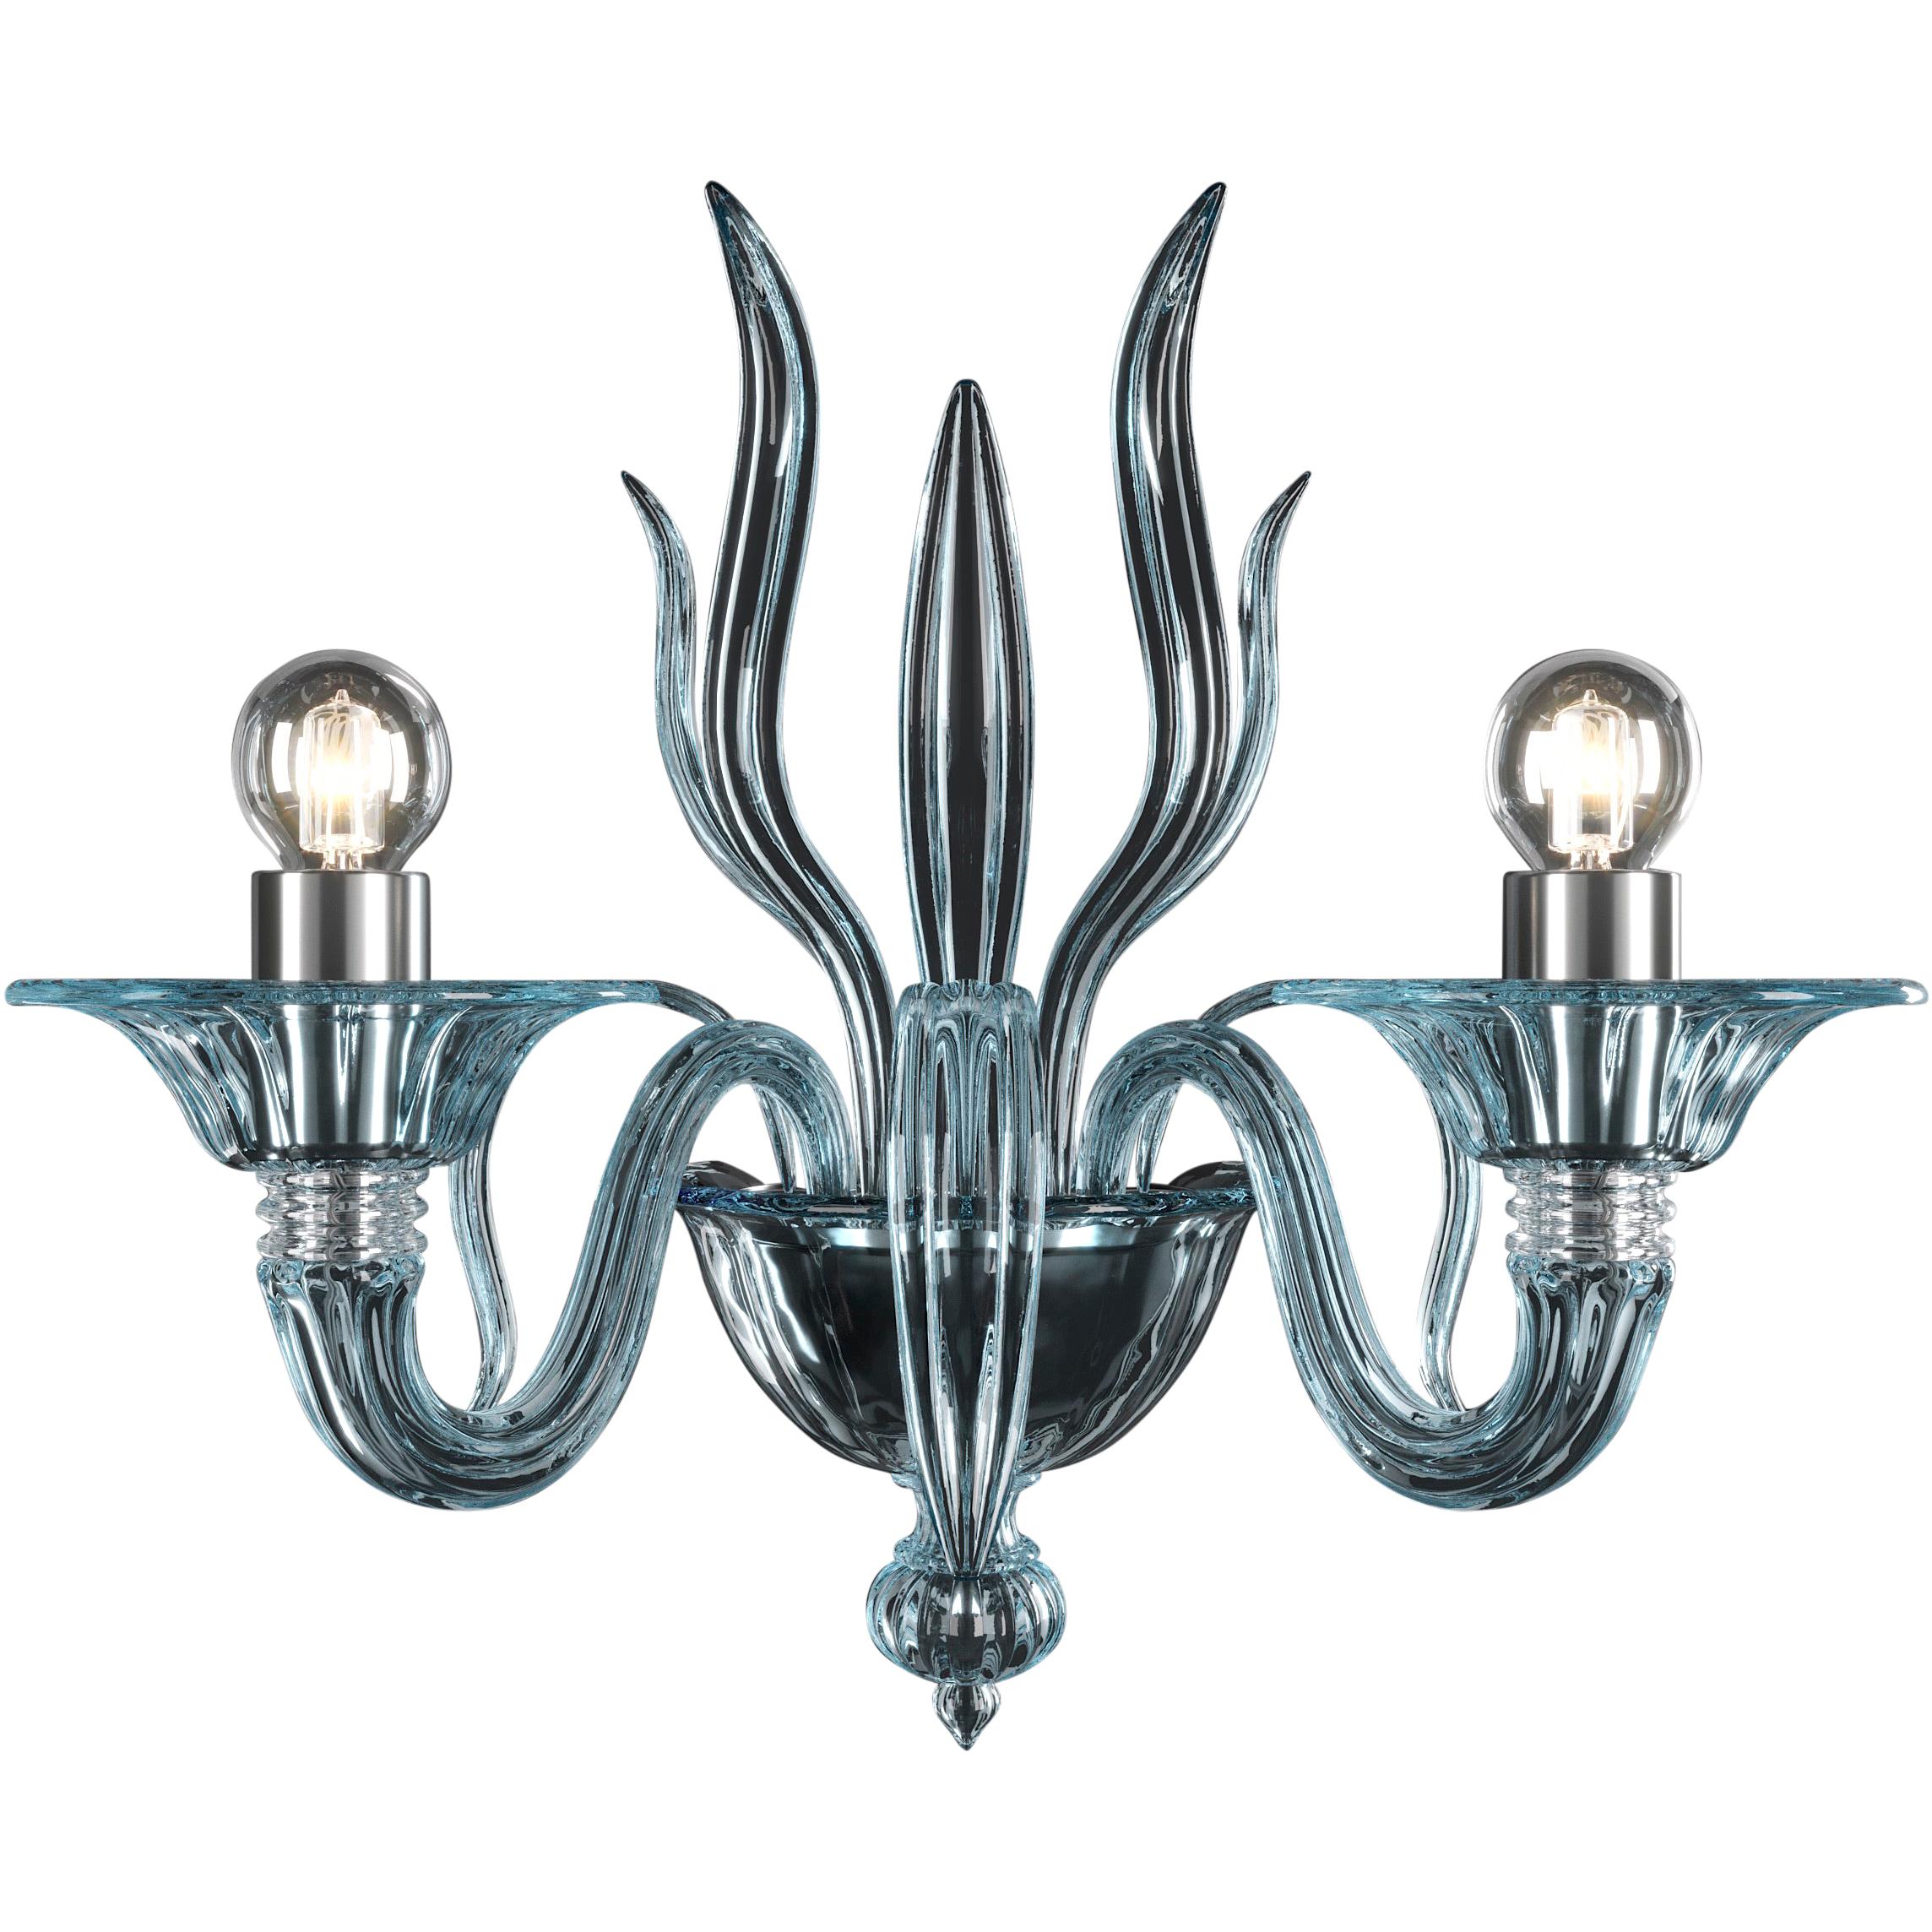 Blue (Aquamarine_AQ) Fauve 5306 02 Wall Sconce in Glass, by Barovier&Toso